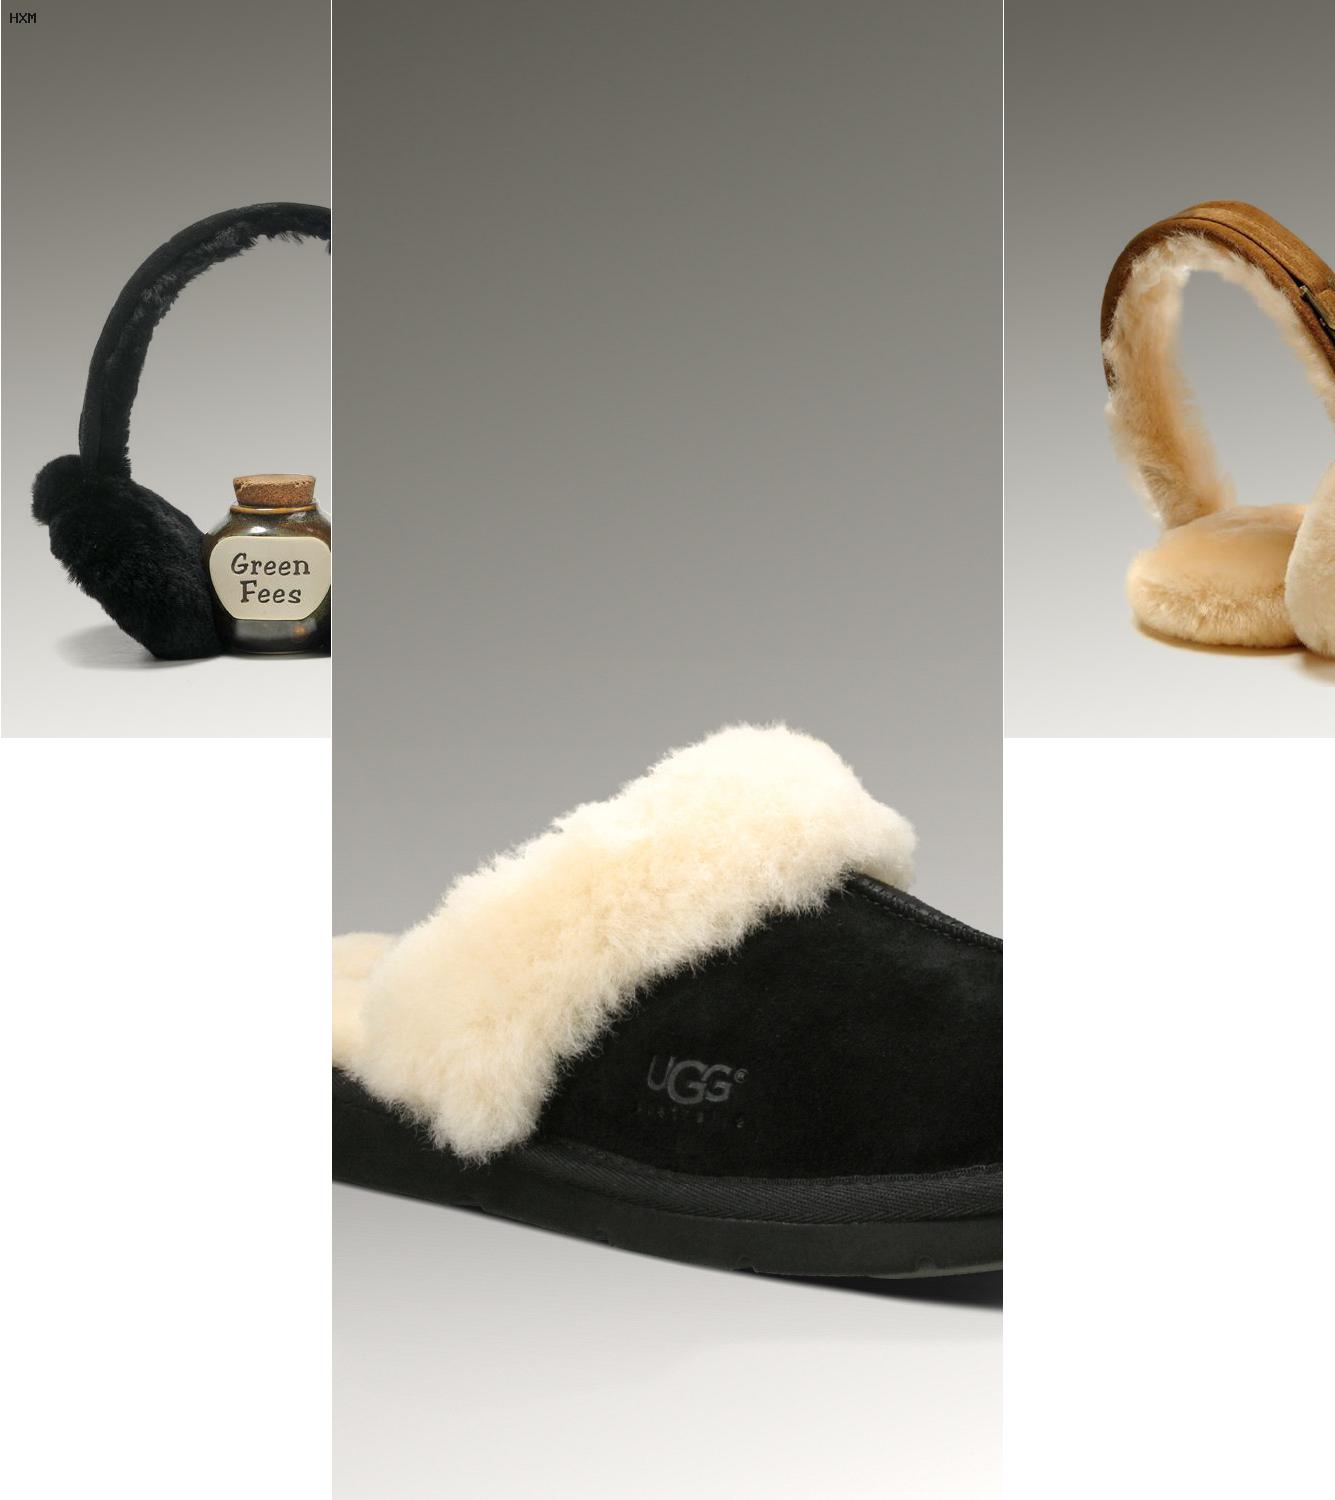 ugg boots australian made and owned